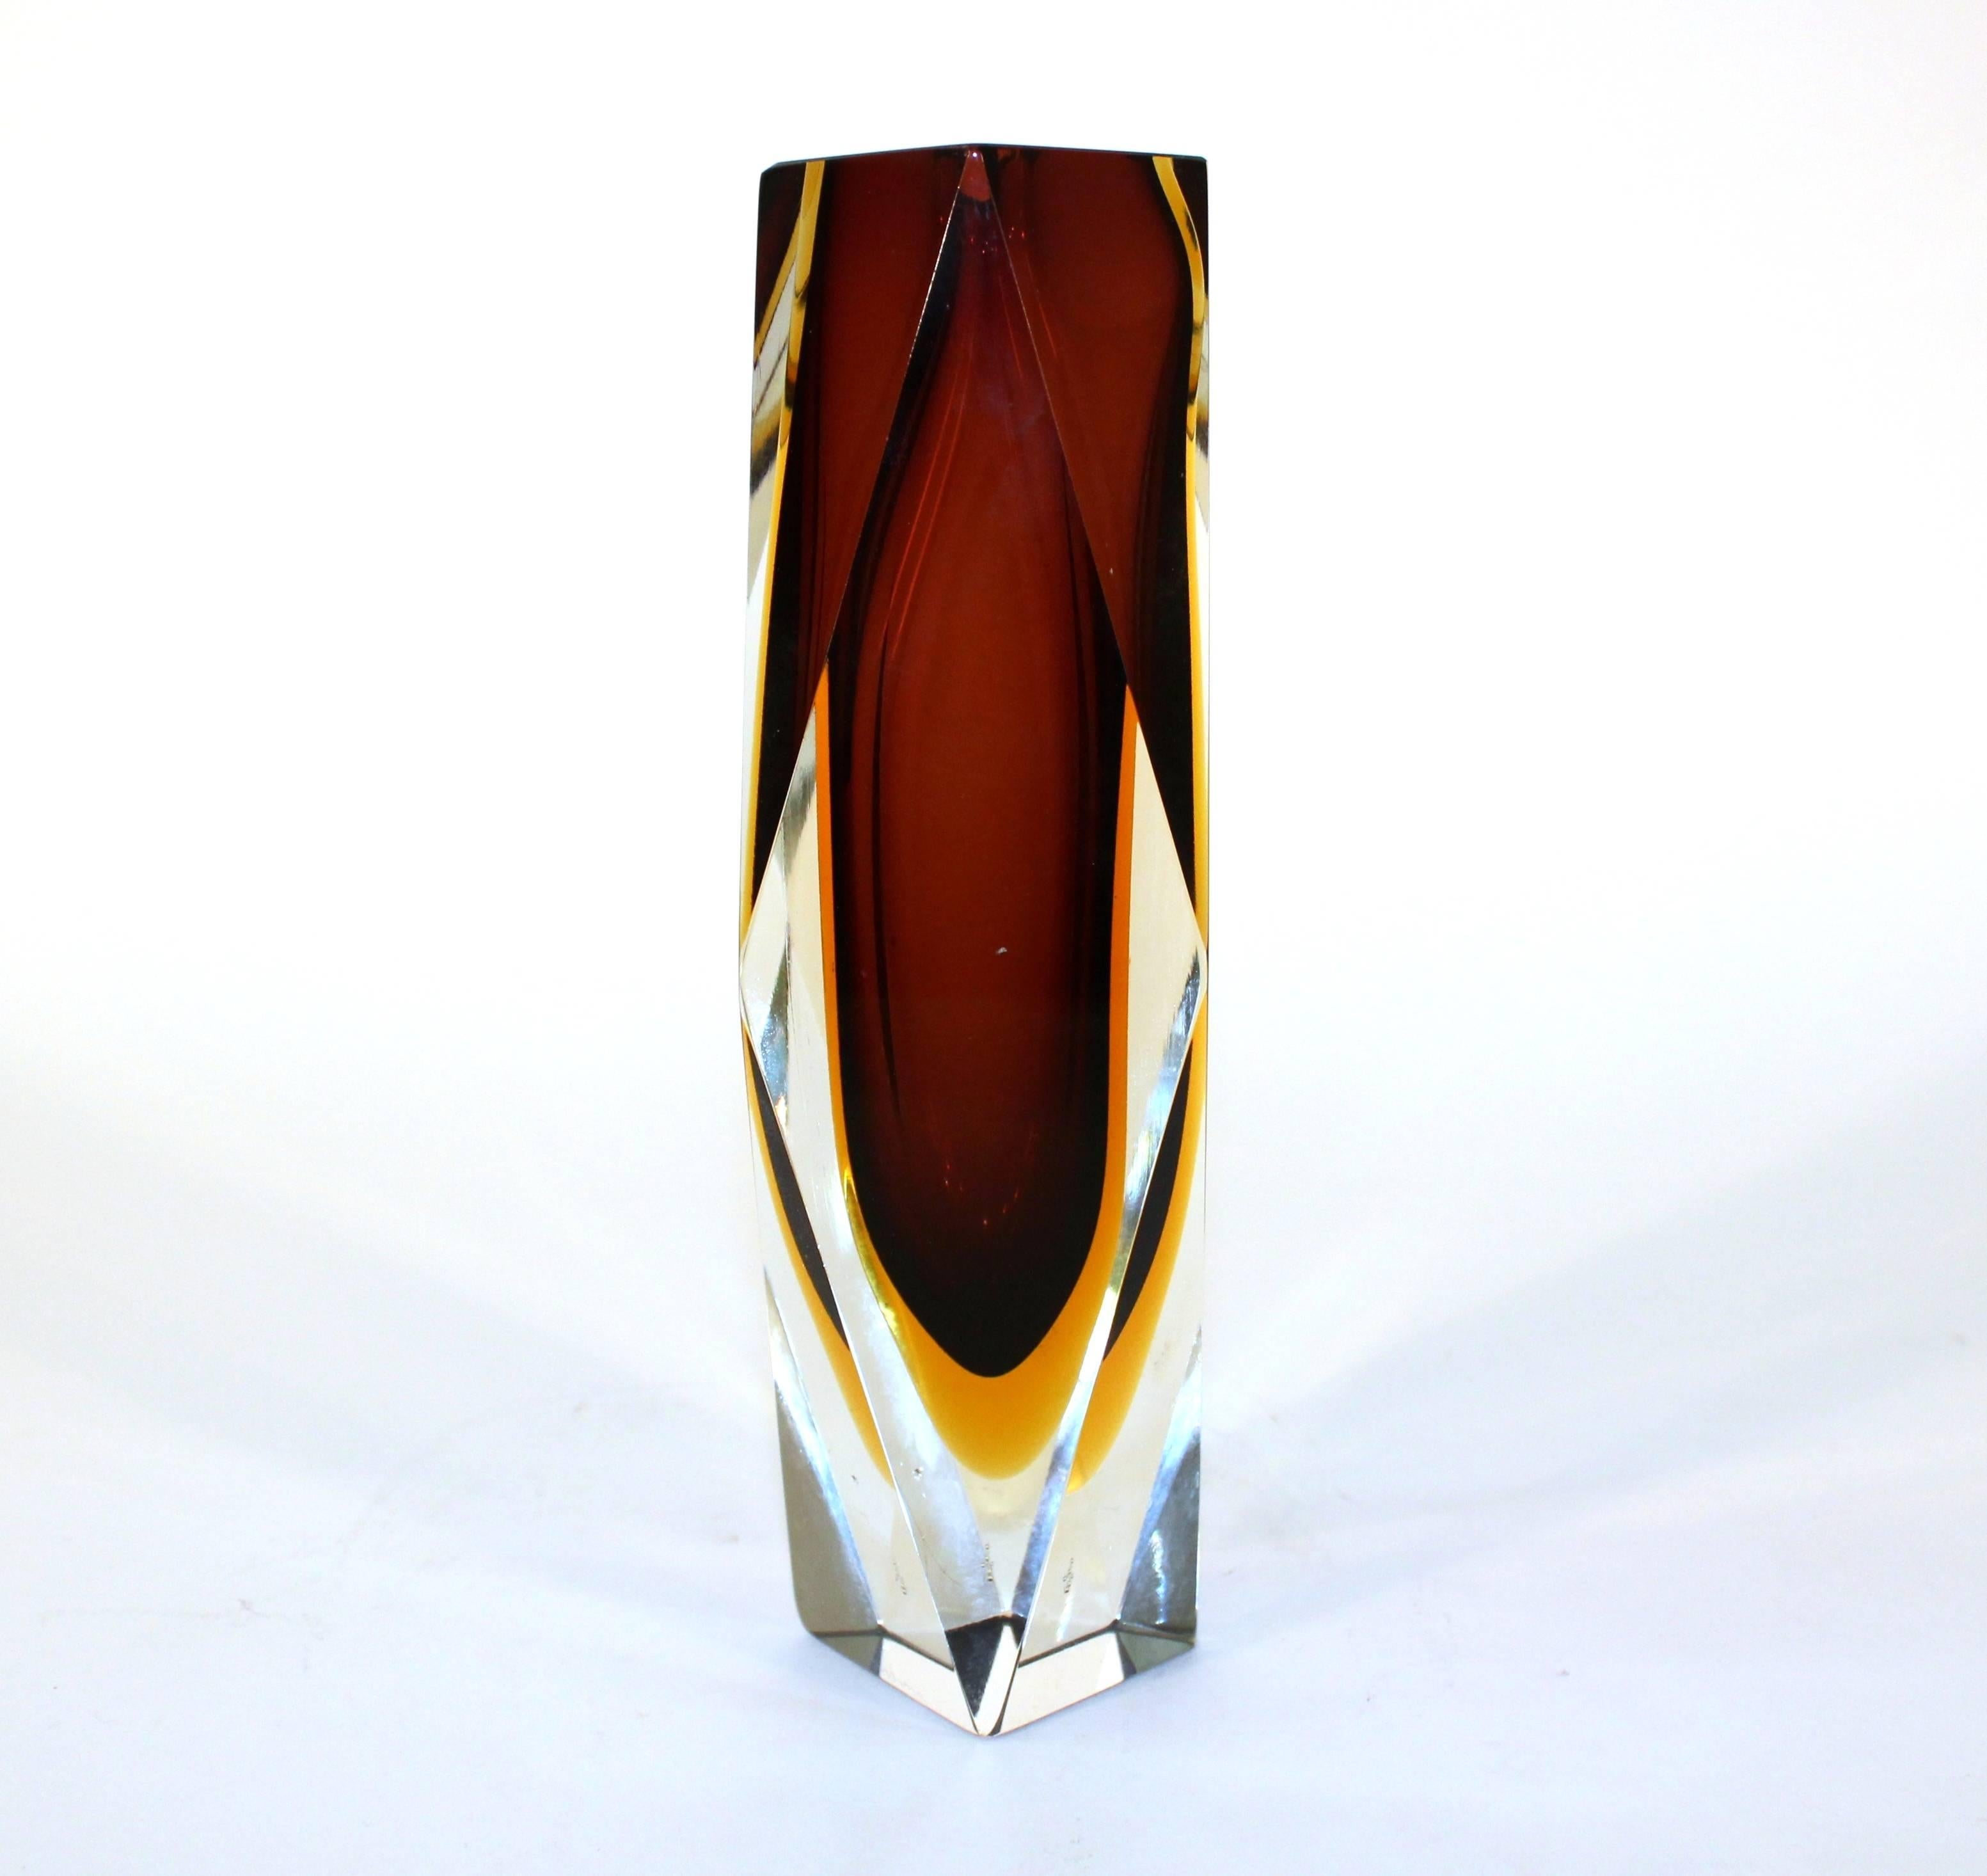 Italian, circa 1960s eight in Murano glass bud vase by Alessandro Mandruzzato, of faceted form crafted with triple Sommerso, amethyst interior surrounded by gold and clear layers. Very good vintage condition, wear to base and minor presence of